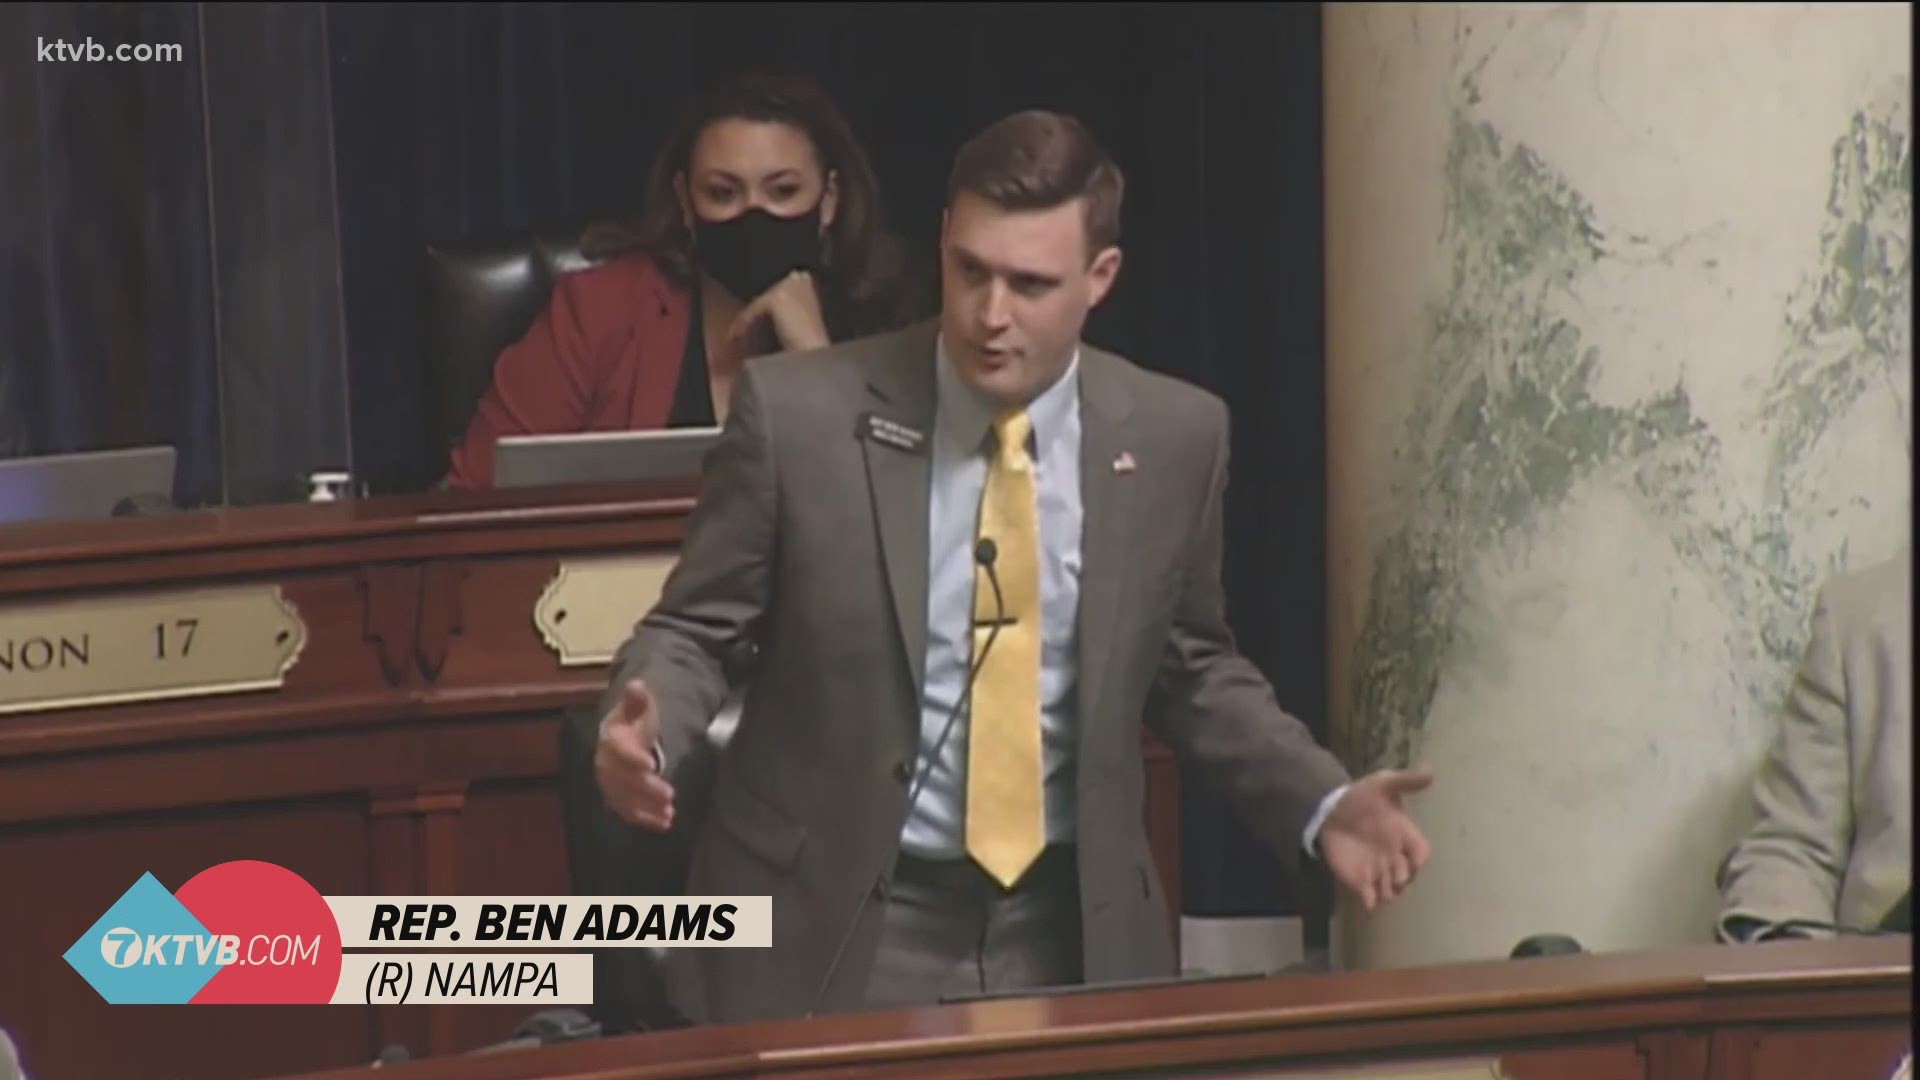 Freshman Rep. Ben Adams (R-Nampa) gave a three-and-a-half-minute speech that included Patrick Henry quotes and intense calls for liberty.